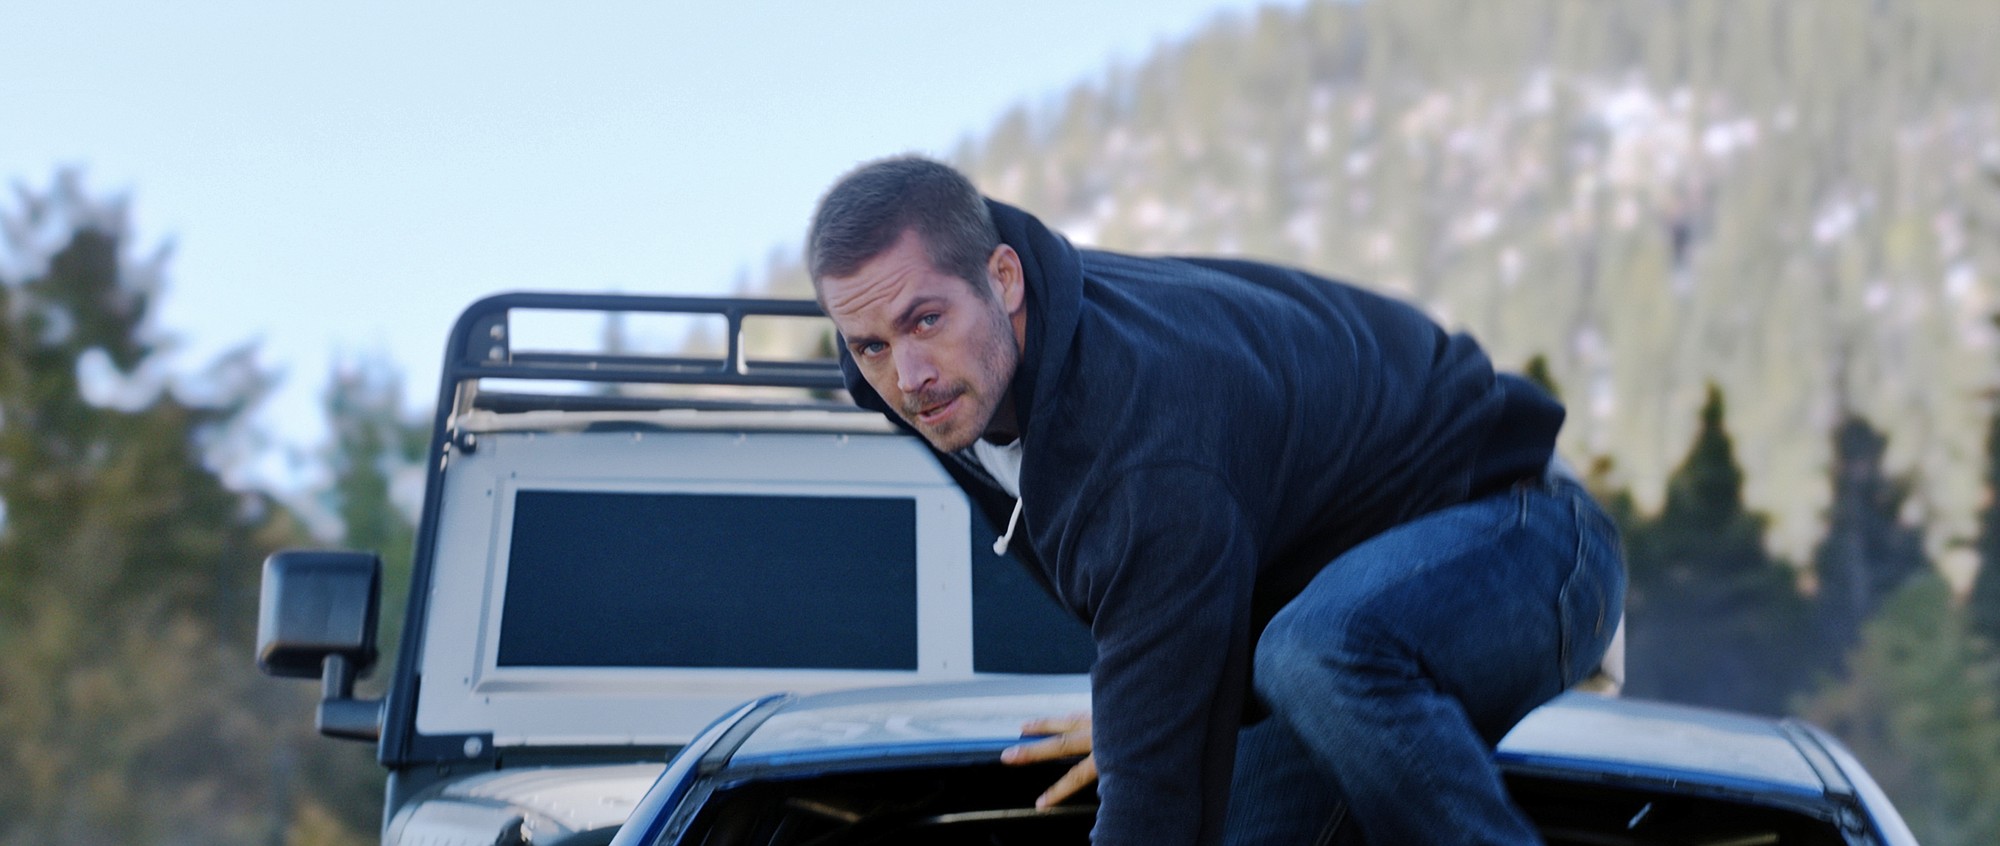 &quot;Furious 7&quot; is dedicated to series veteran Paul Walker, who died in a car crash in 2013, while the film was still in production.